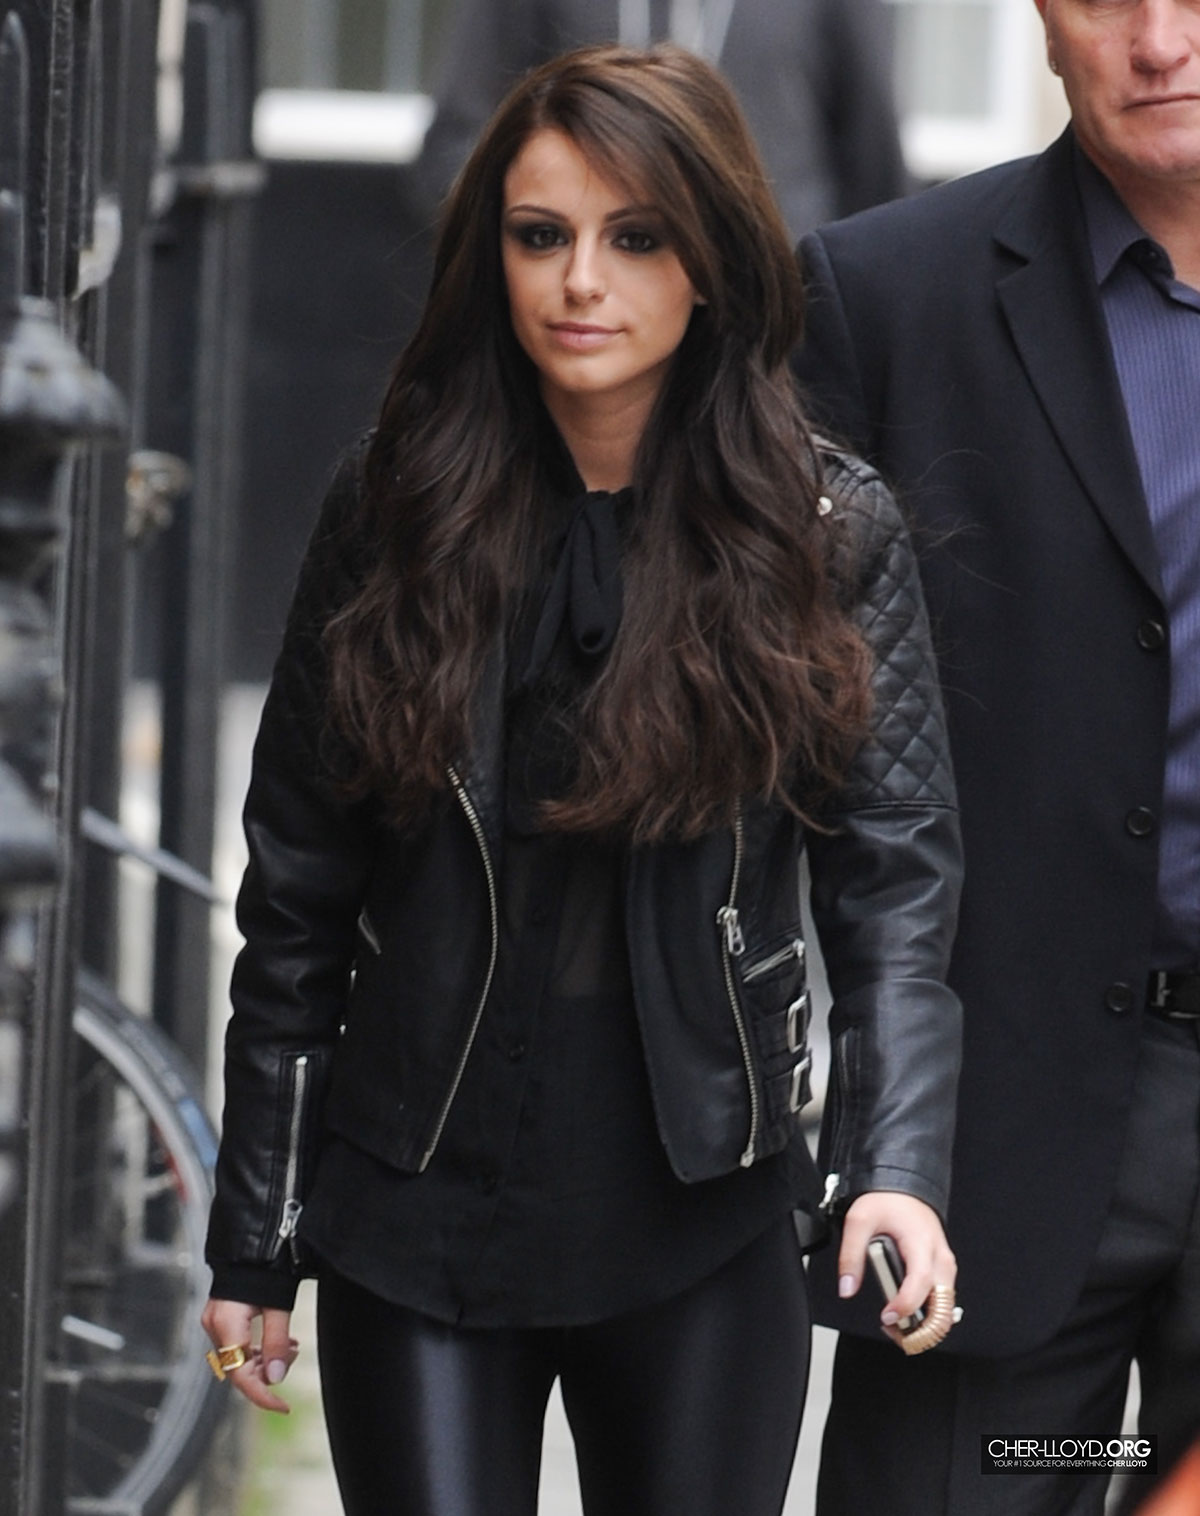 Cher Lloyd at Sony offices in London